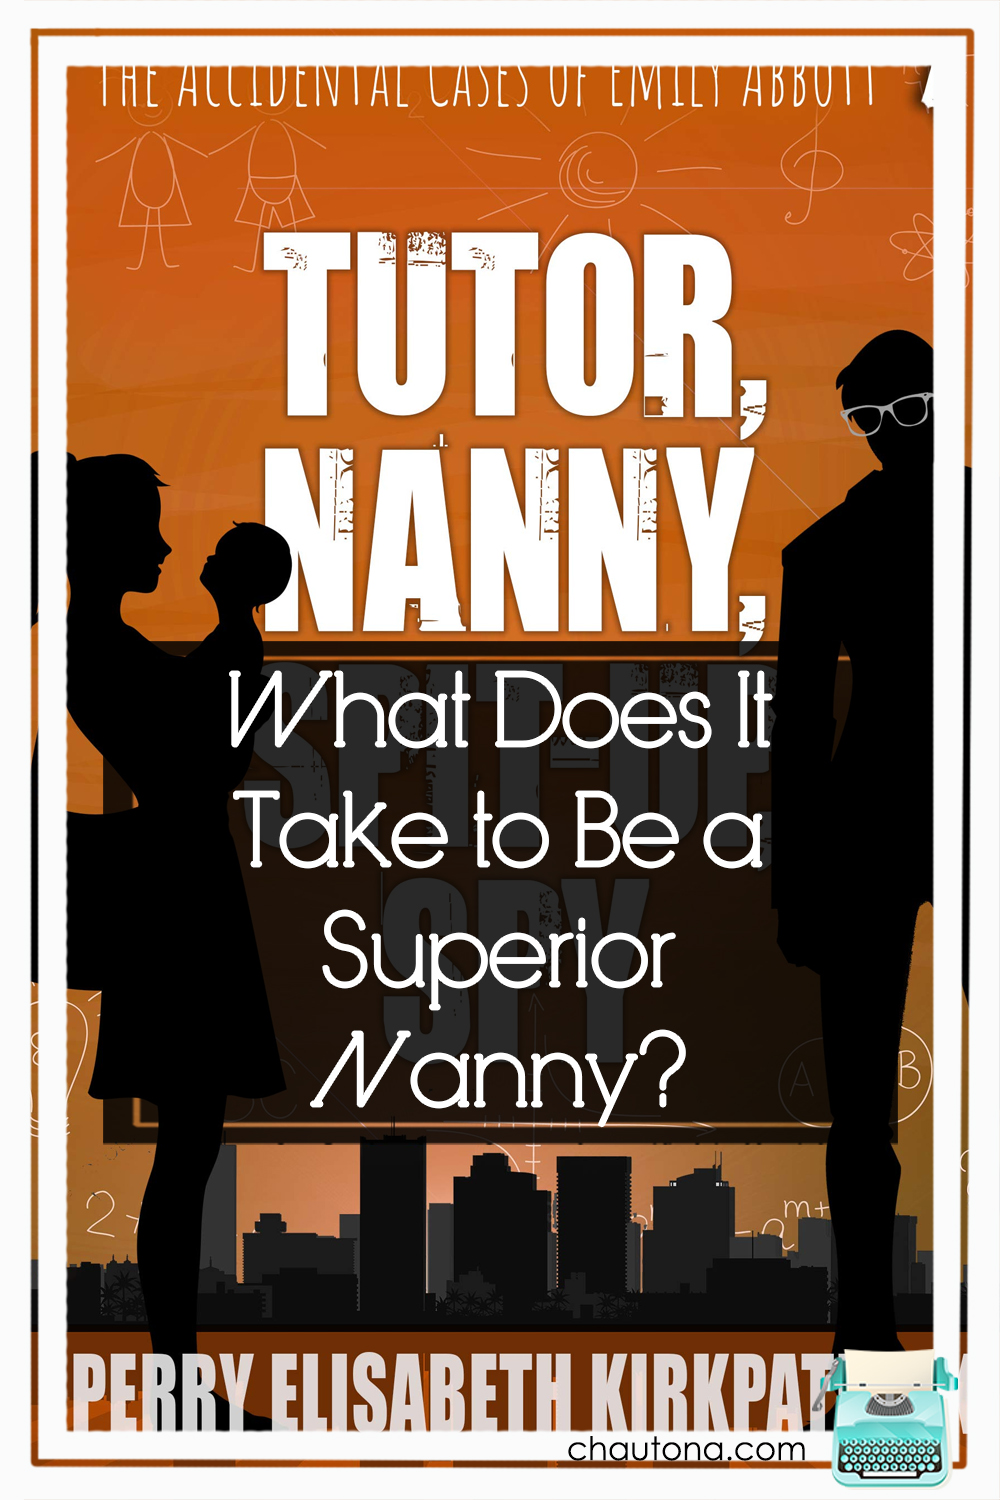 "Tutor, Sanny, Spit-up, Spy" couldn't have been more fun if Nanny McPhee arrived with Colin Firth and set everything to rights herself! Seriously, hilarious. via @chautonahavig